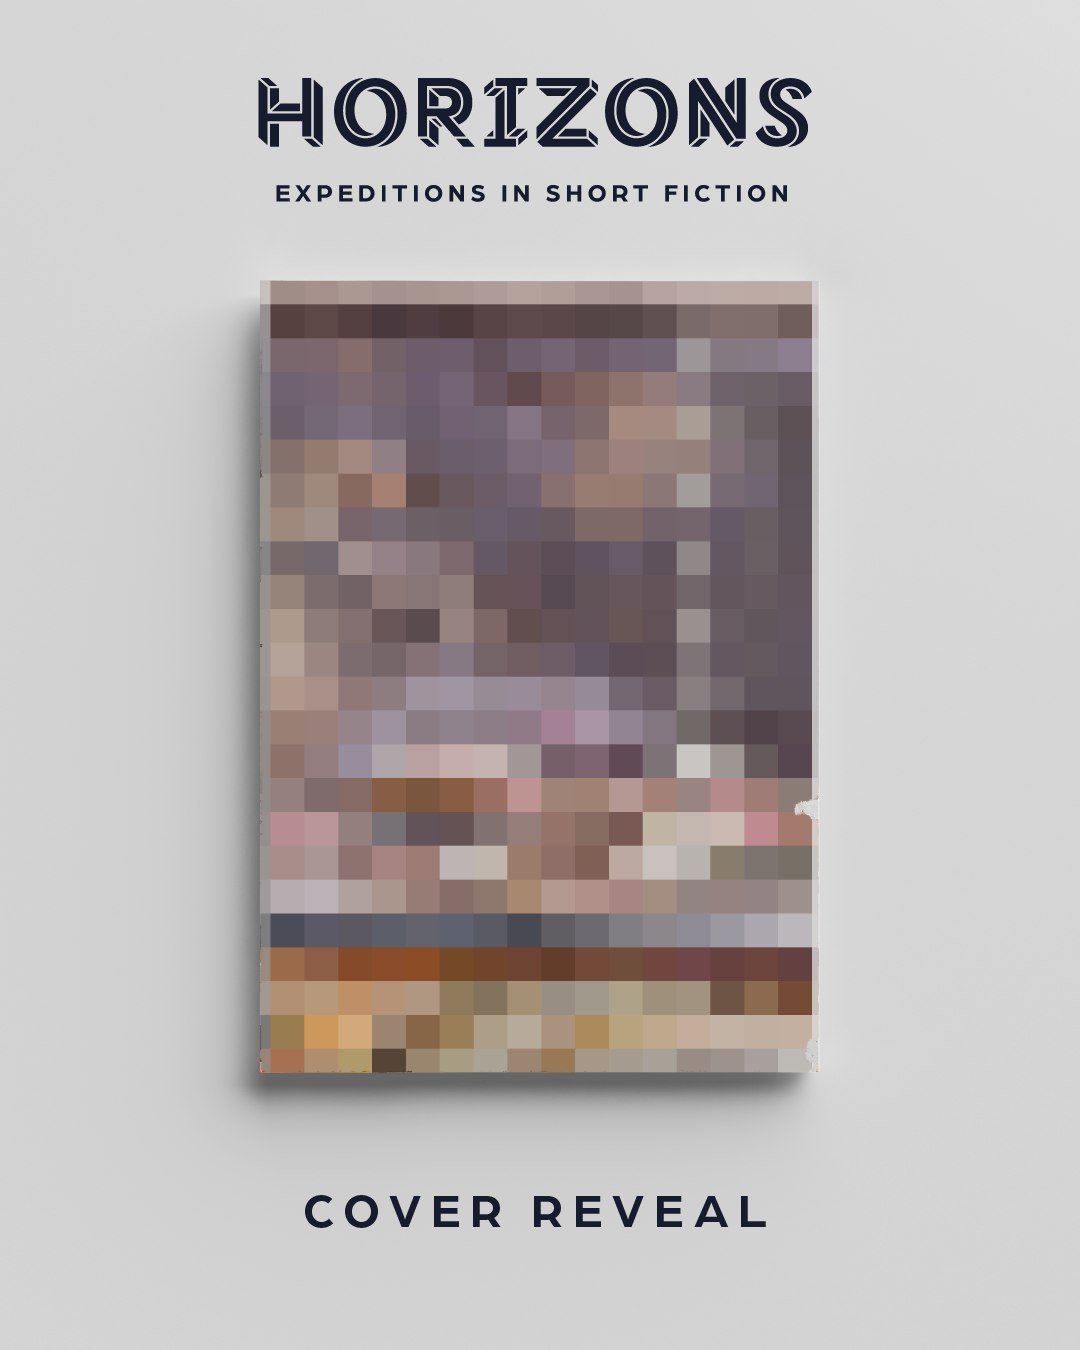 #CoverReveal: It's almost here! Swipe to get your first look at &quot;HORIZONS: Expeditions in Short Fiction&quot; &mdash; the latest print anthology from Twenty Bellows. Coming soon!

The stunning painting gracing the cover of the book is the work o